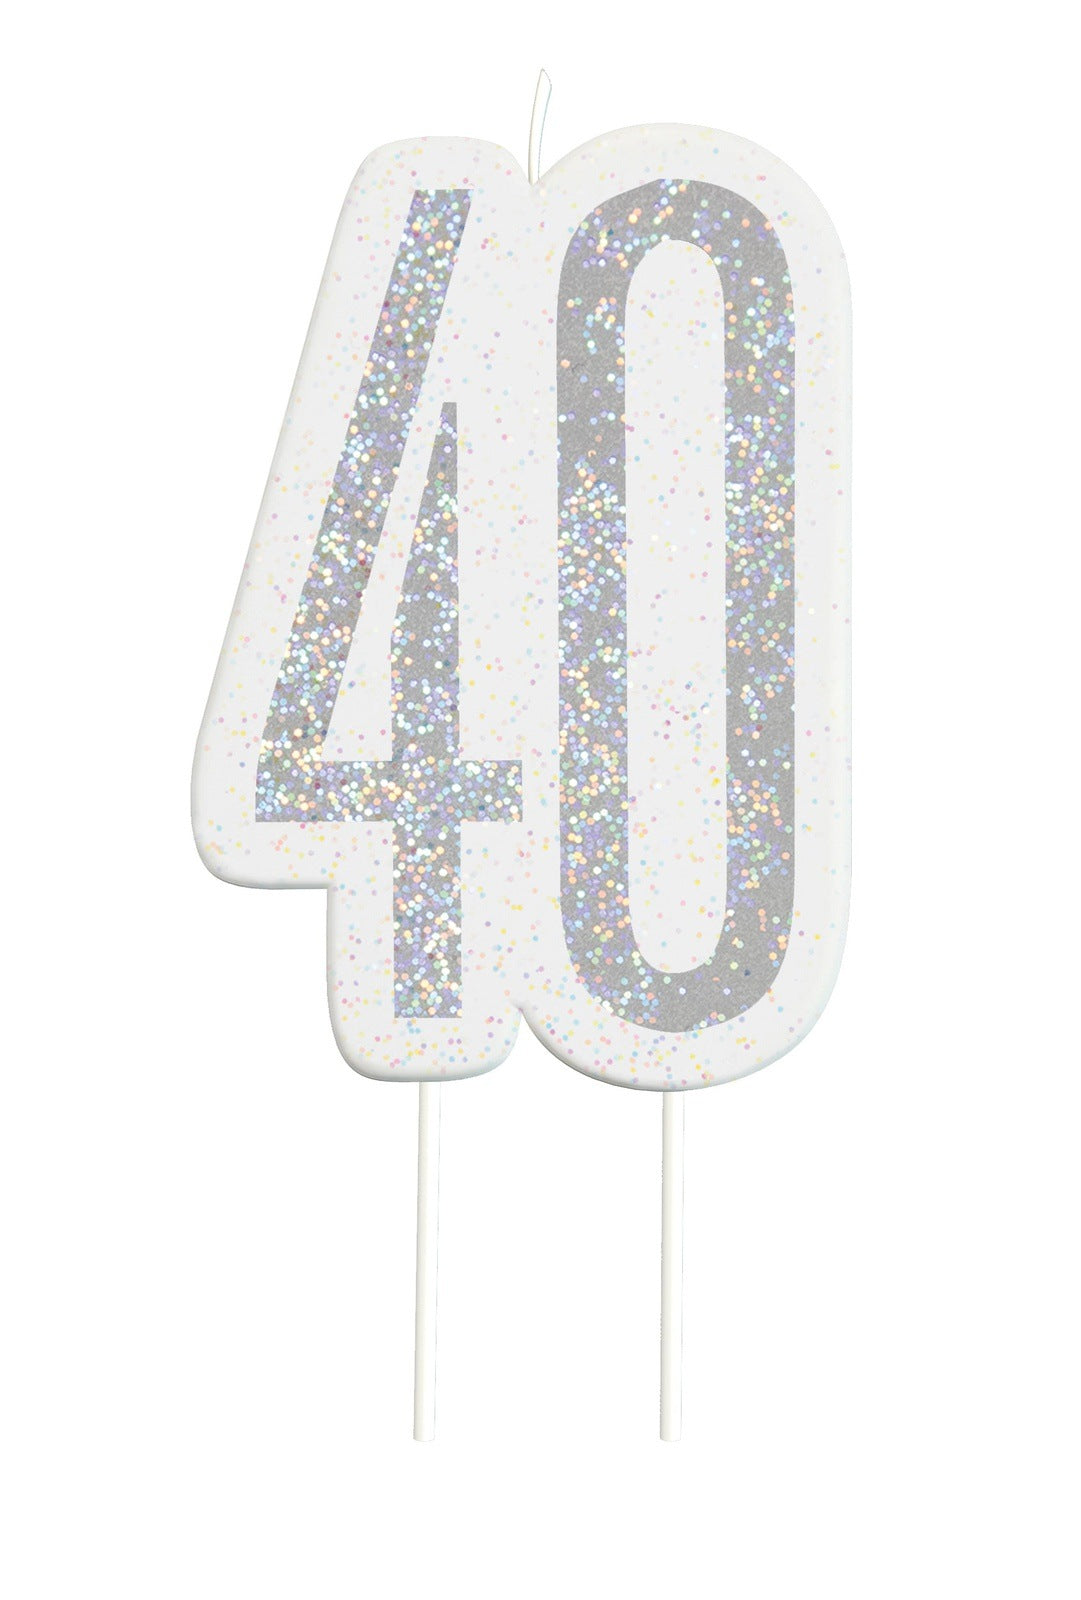 Black & Silver Number 40 Numeral Candle